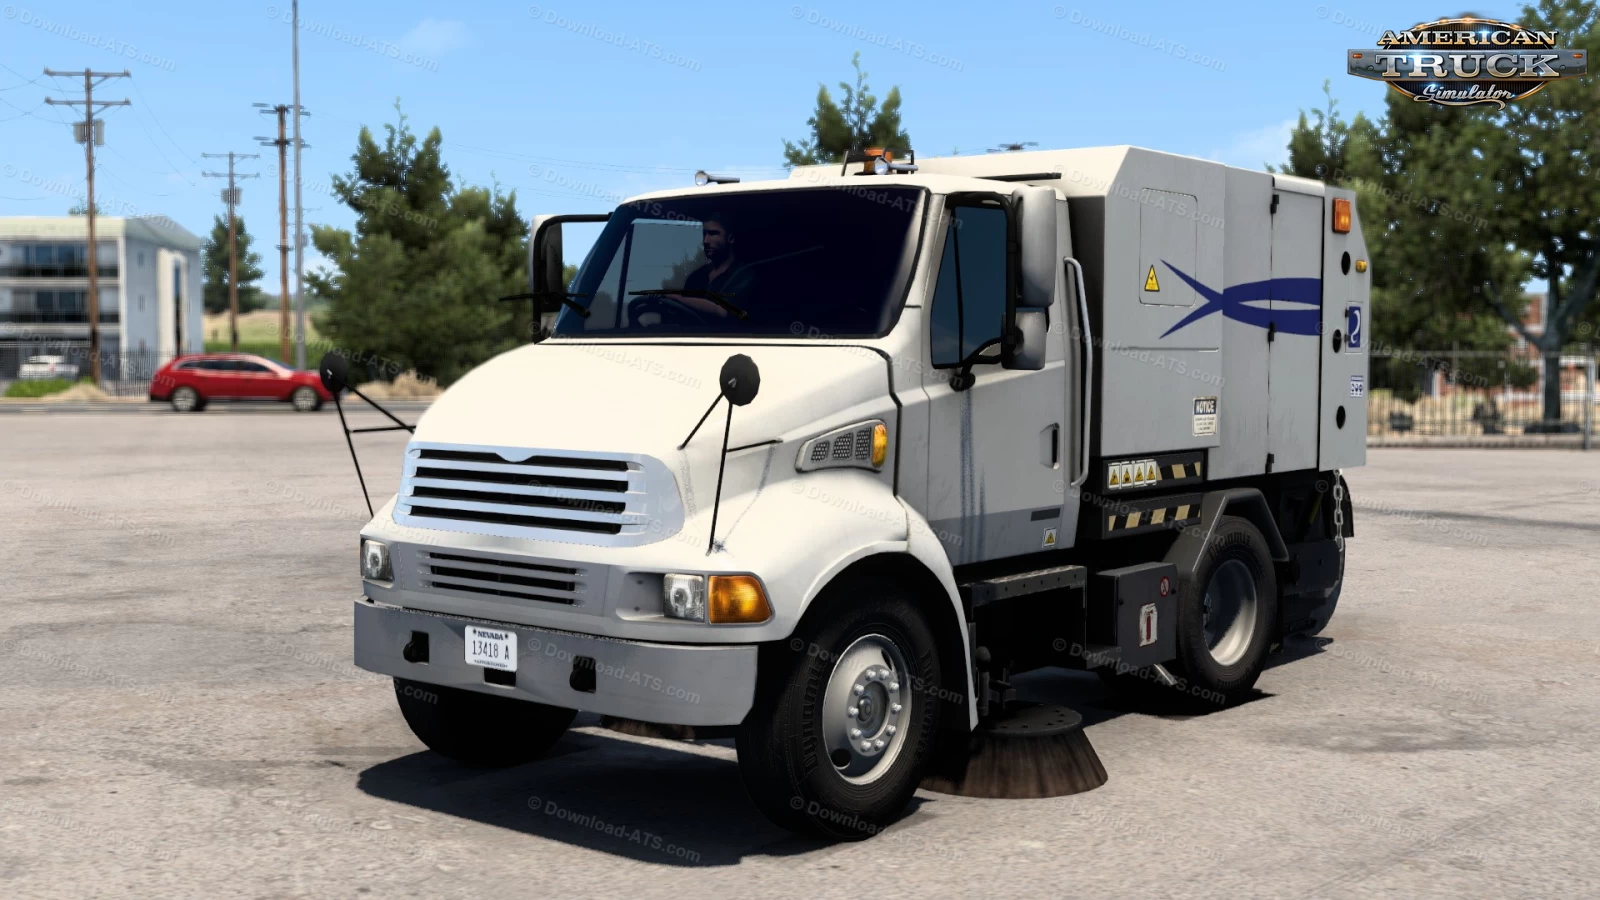 Driveable Street Sweeper v1.1 (1.42.x) for ATS